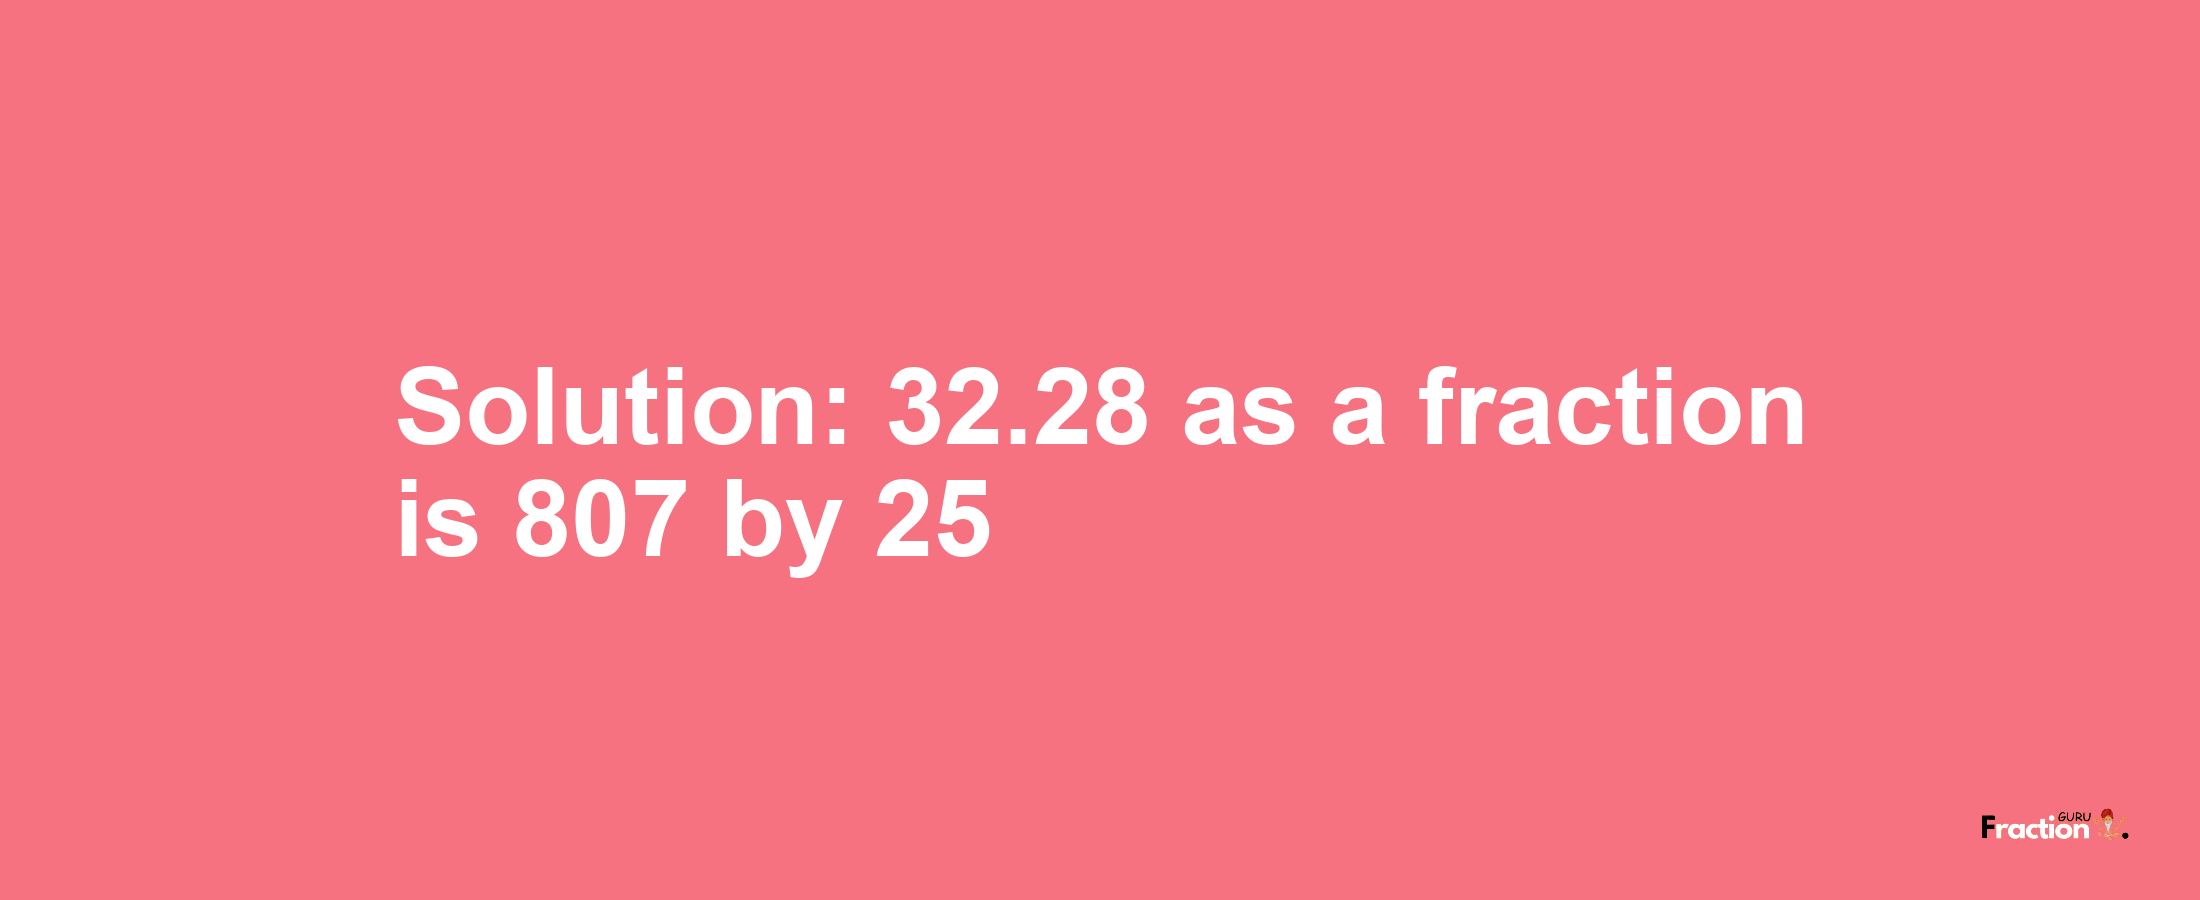 Solution:32.28 as a fraction is 807/25